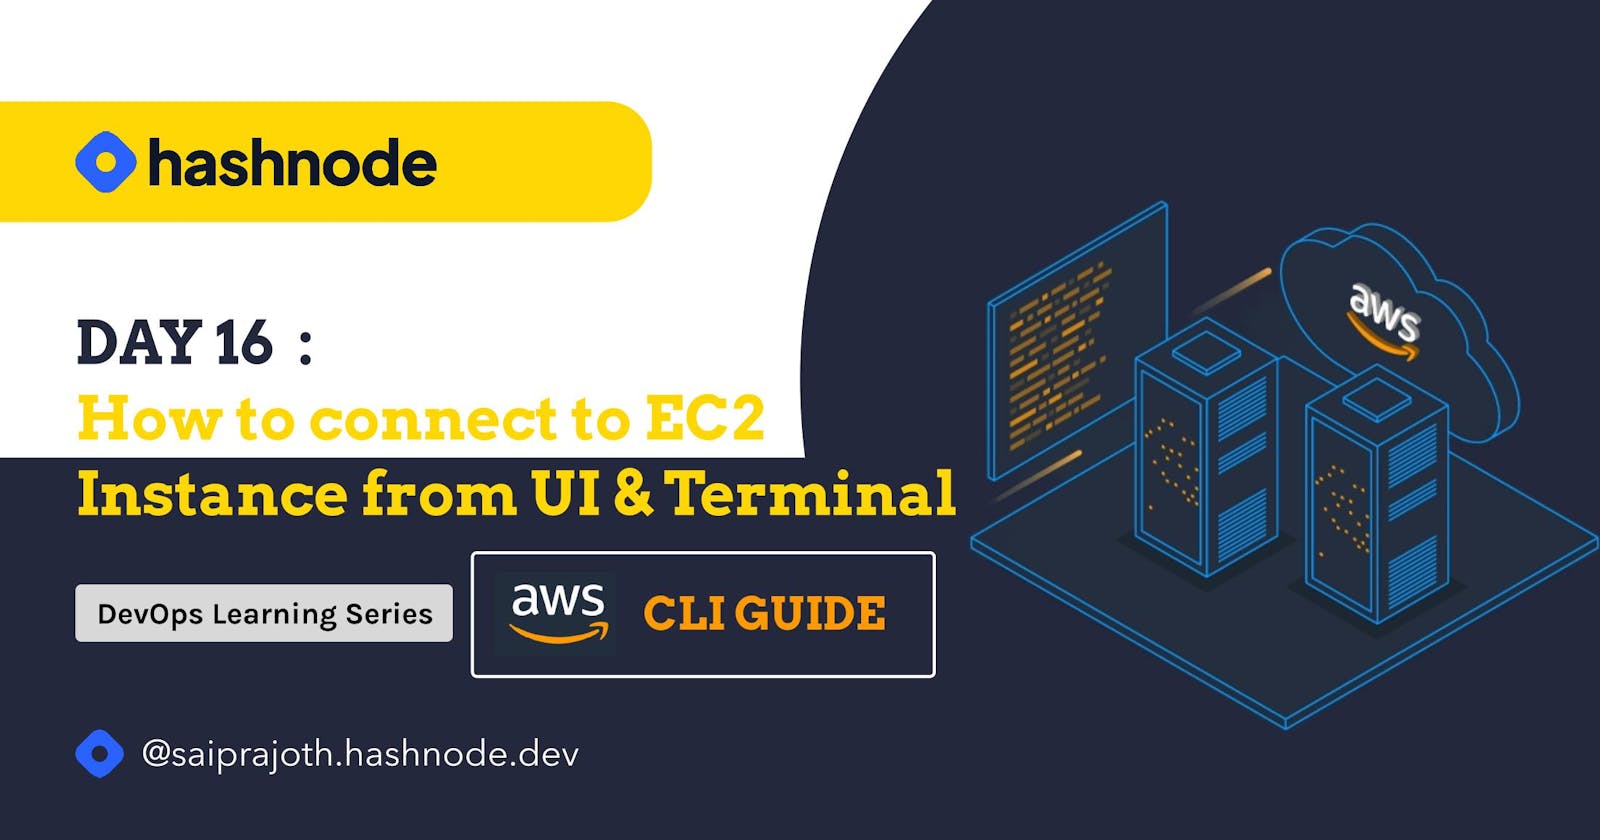 Day 16: How to connect to EC2 Instance from UI & Terminal